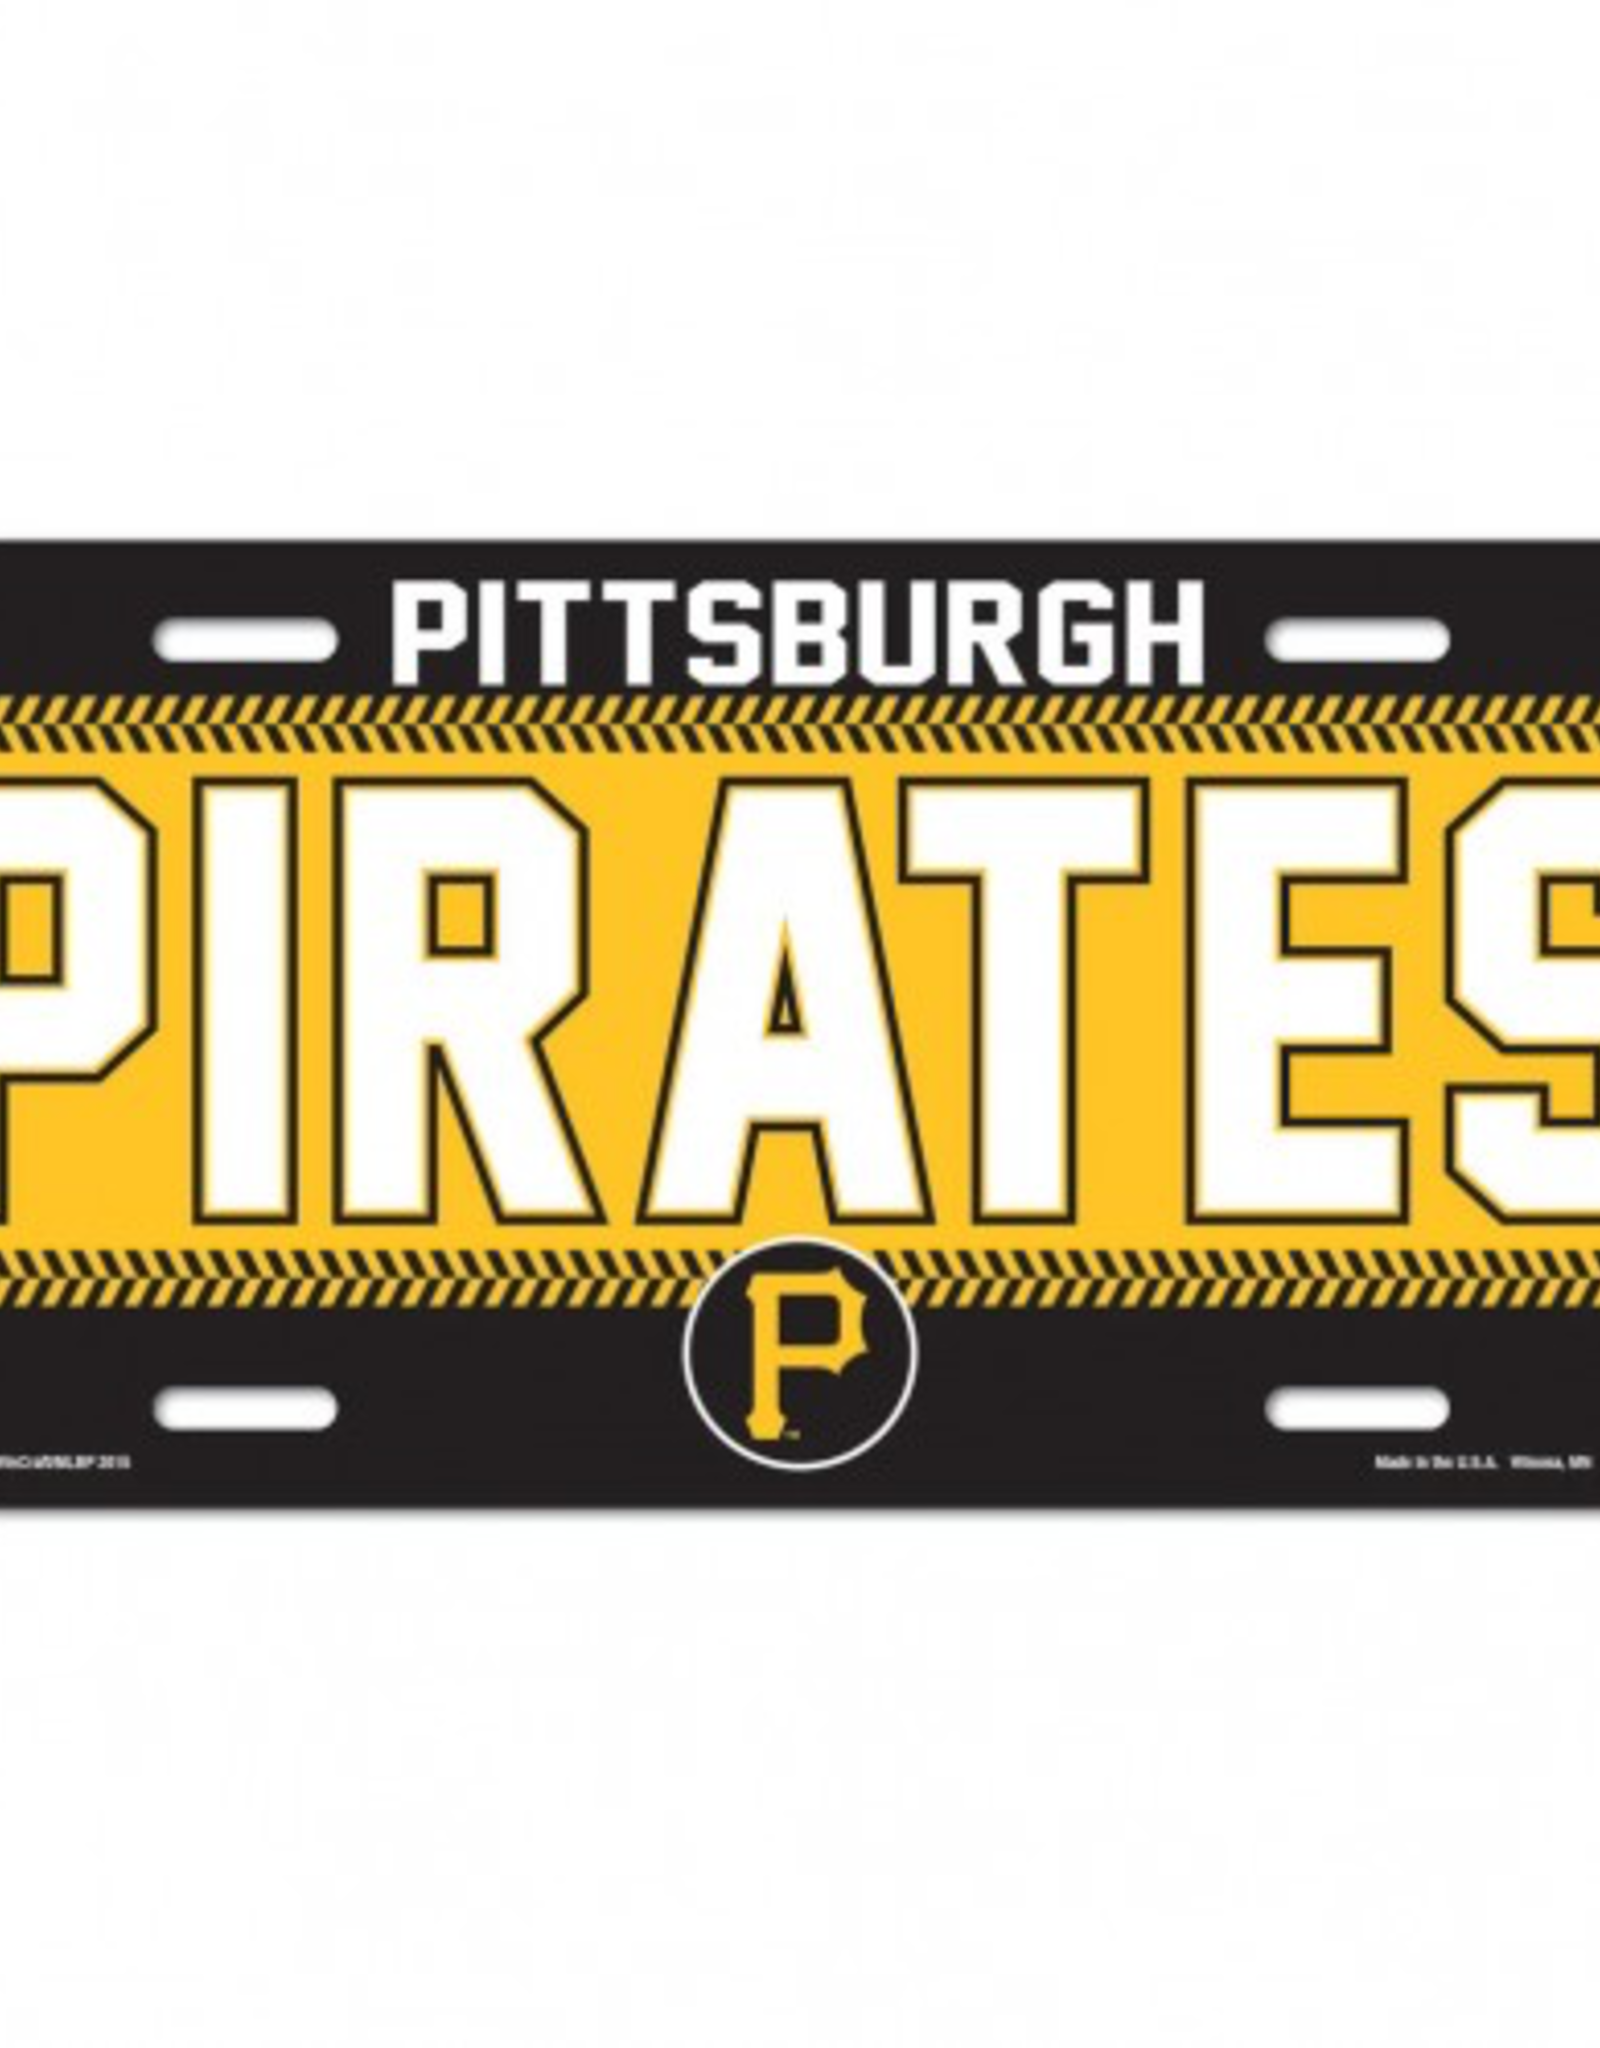 WINCRAFT Pittsburgh Pirates License Plate